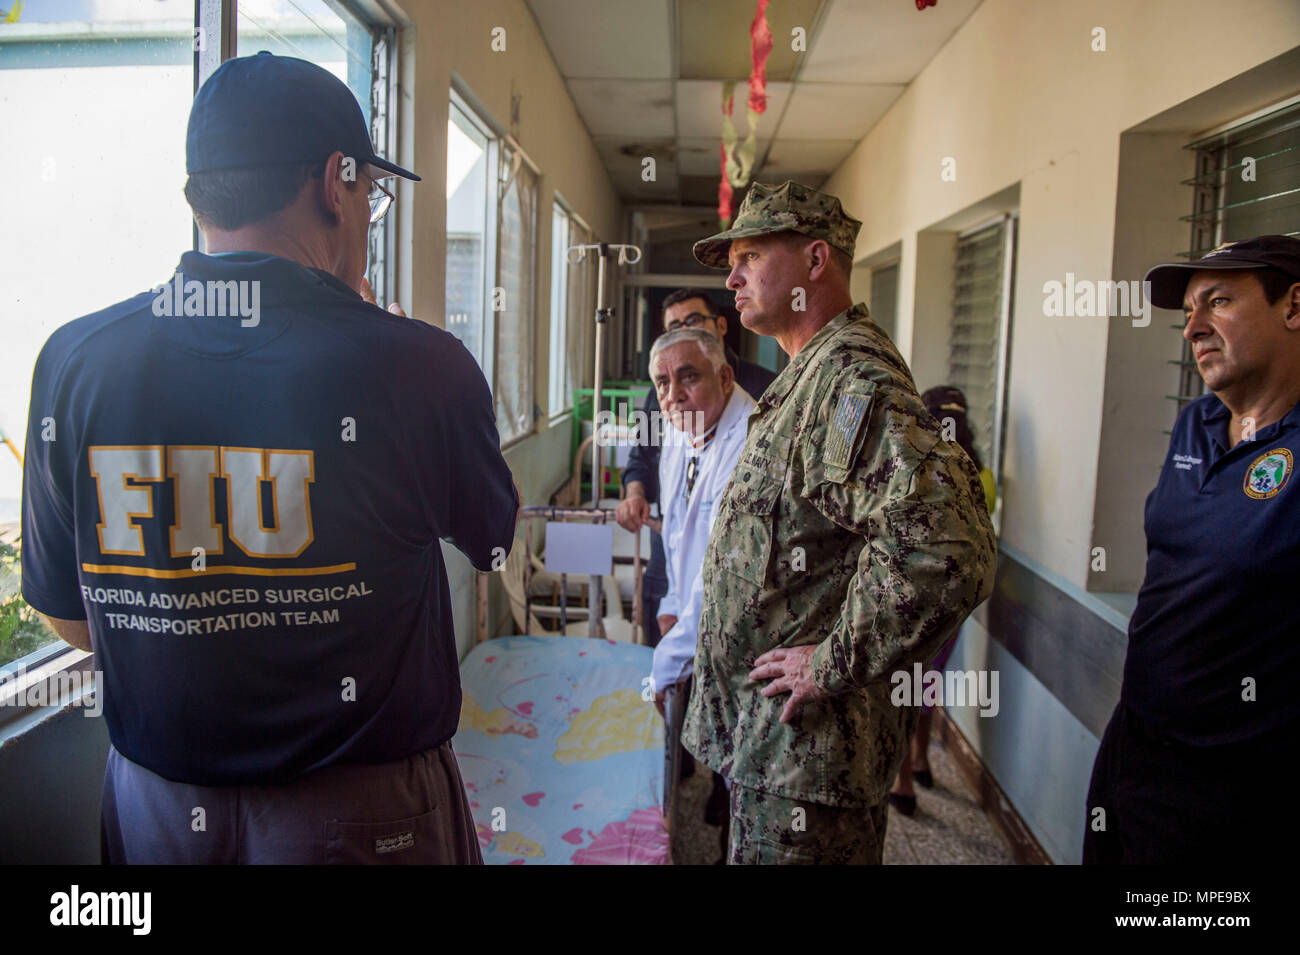 170209-N-YL073-305 PUERTO BARRIOS, Guatemala (Feb. 9, 2017) – Capt. Errin  Armstrong, Mission Commander for Continuing Promise 2017 (CP-17), tours Hospital Infantil Elisa Martinez, the only pediatric hospital in Guatemala, in support of CP-17's visit to Puerto Barrios, Guatemala. CP-17 is a U.S. Southern Command-sponsored and U.S. Naval Forces Southern Command/U.S. 4th Fleet-conducted deployment to conduct civil-military operations including humanitarian assistance, training engagements, and medical, dental, and veterinary support in an effort to show U.S. support and commitment to Central and Stock Photo